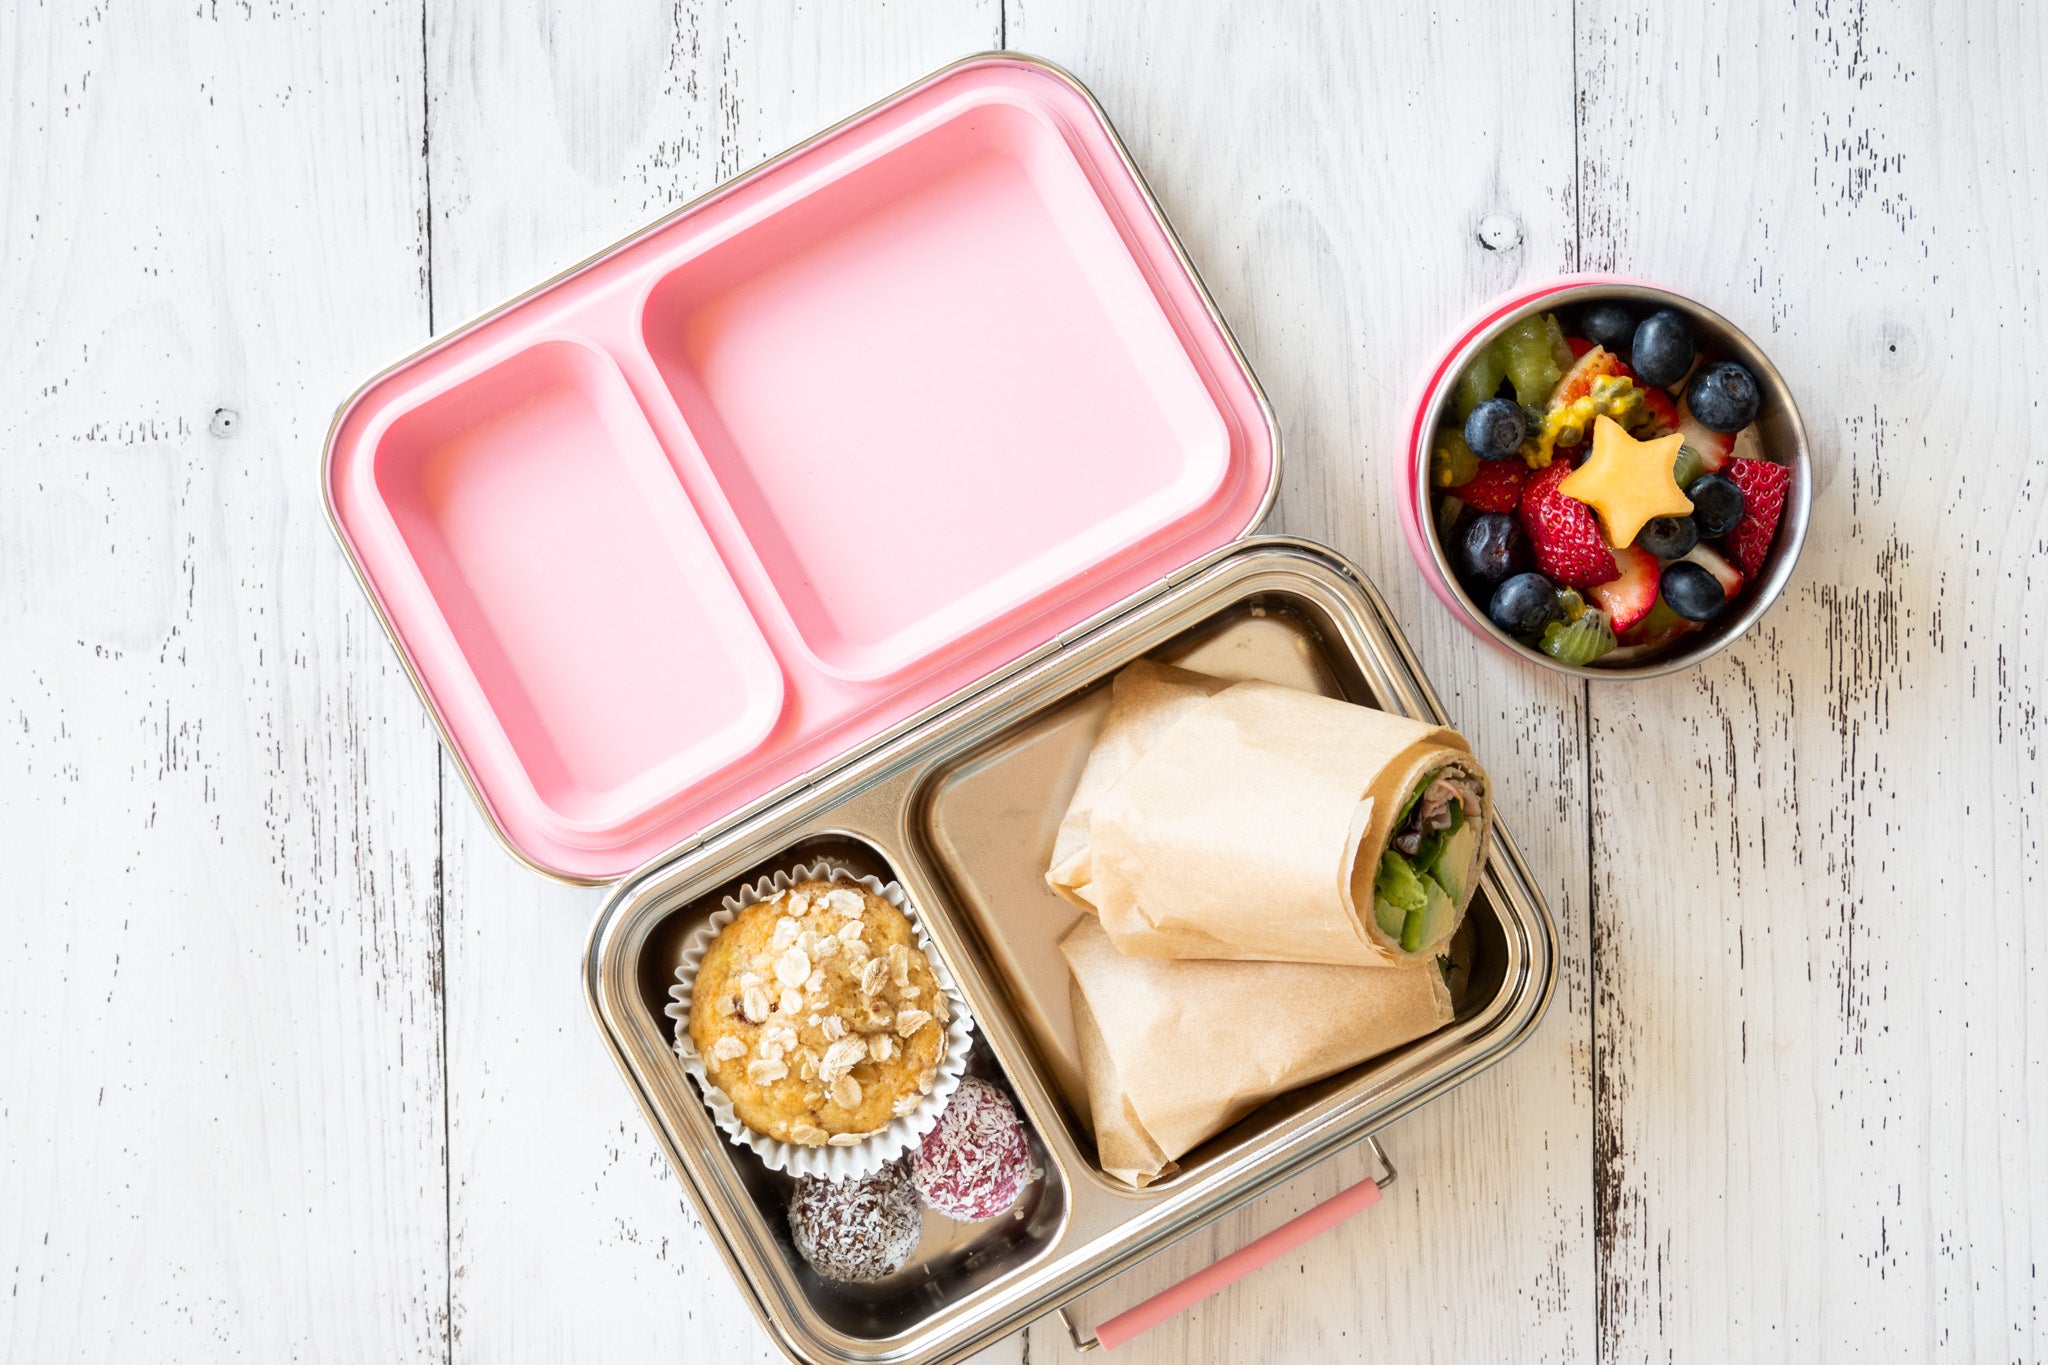 two compartment stainless steel lunch box with pink fizz silicone seal - nudie rudie lunch box